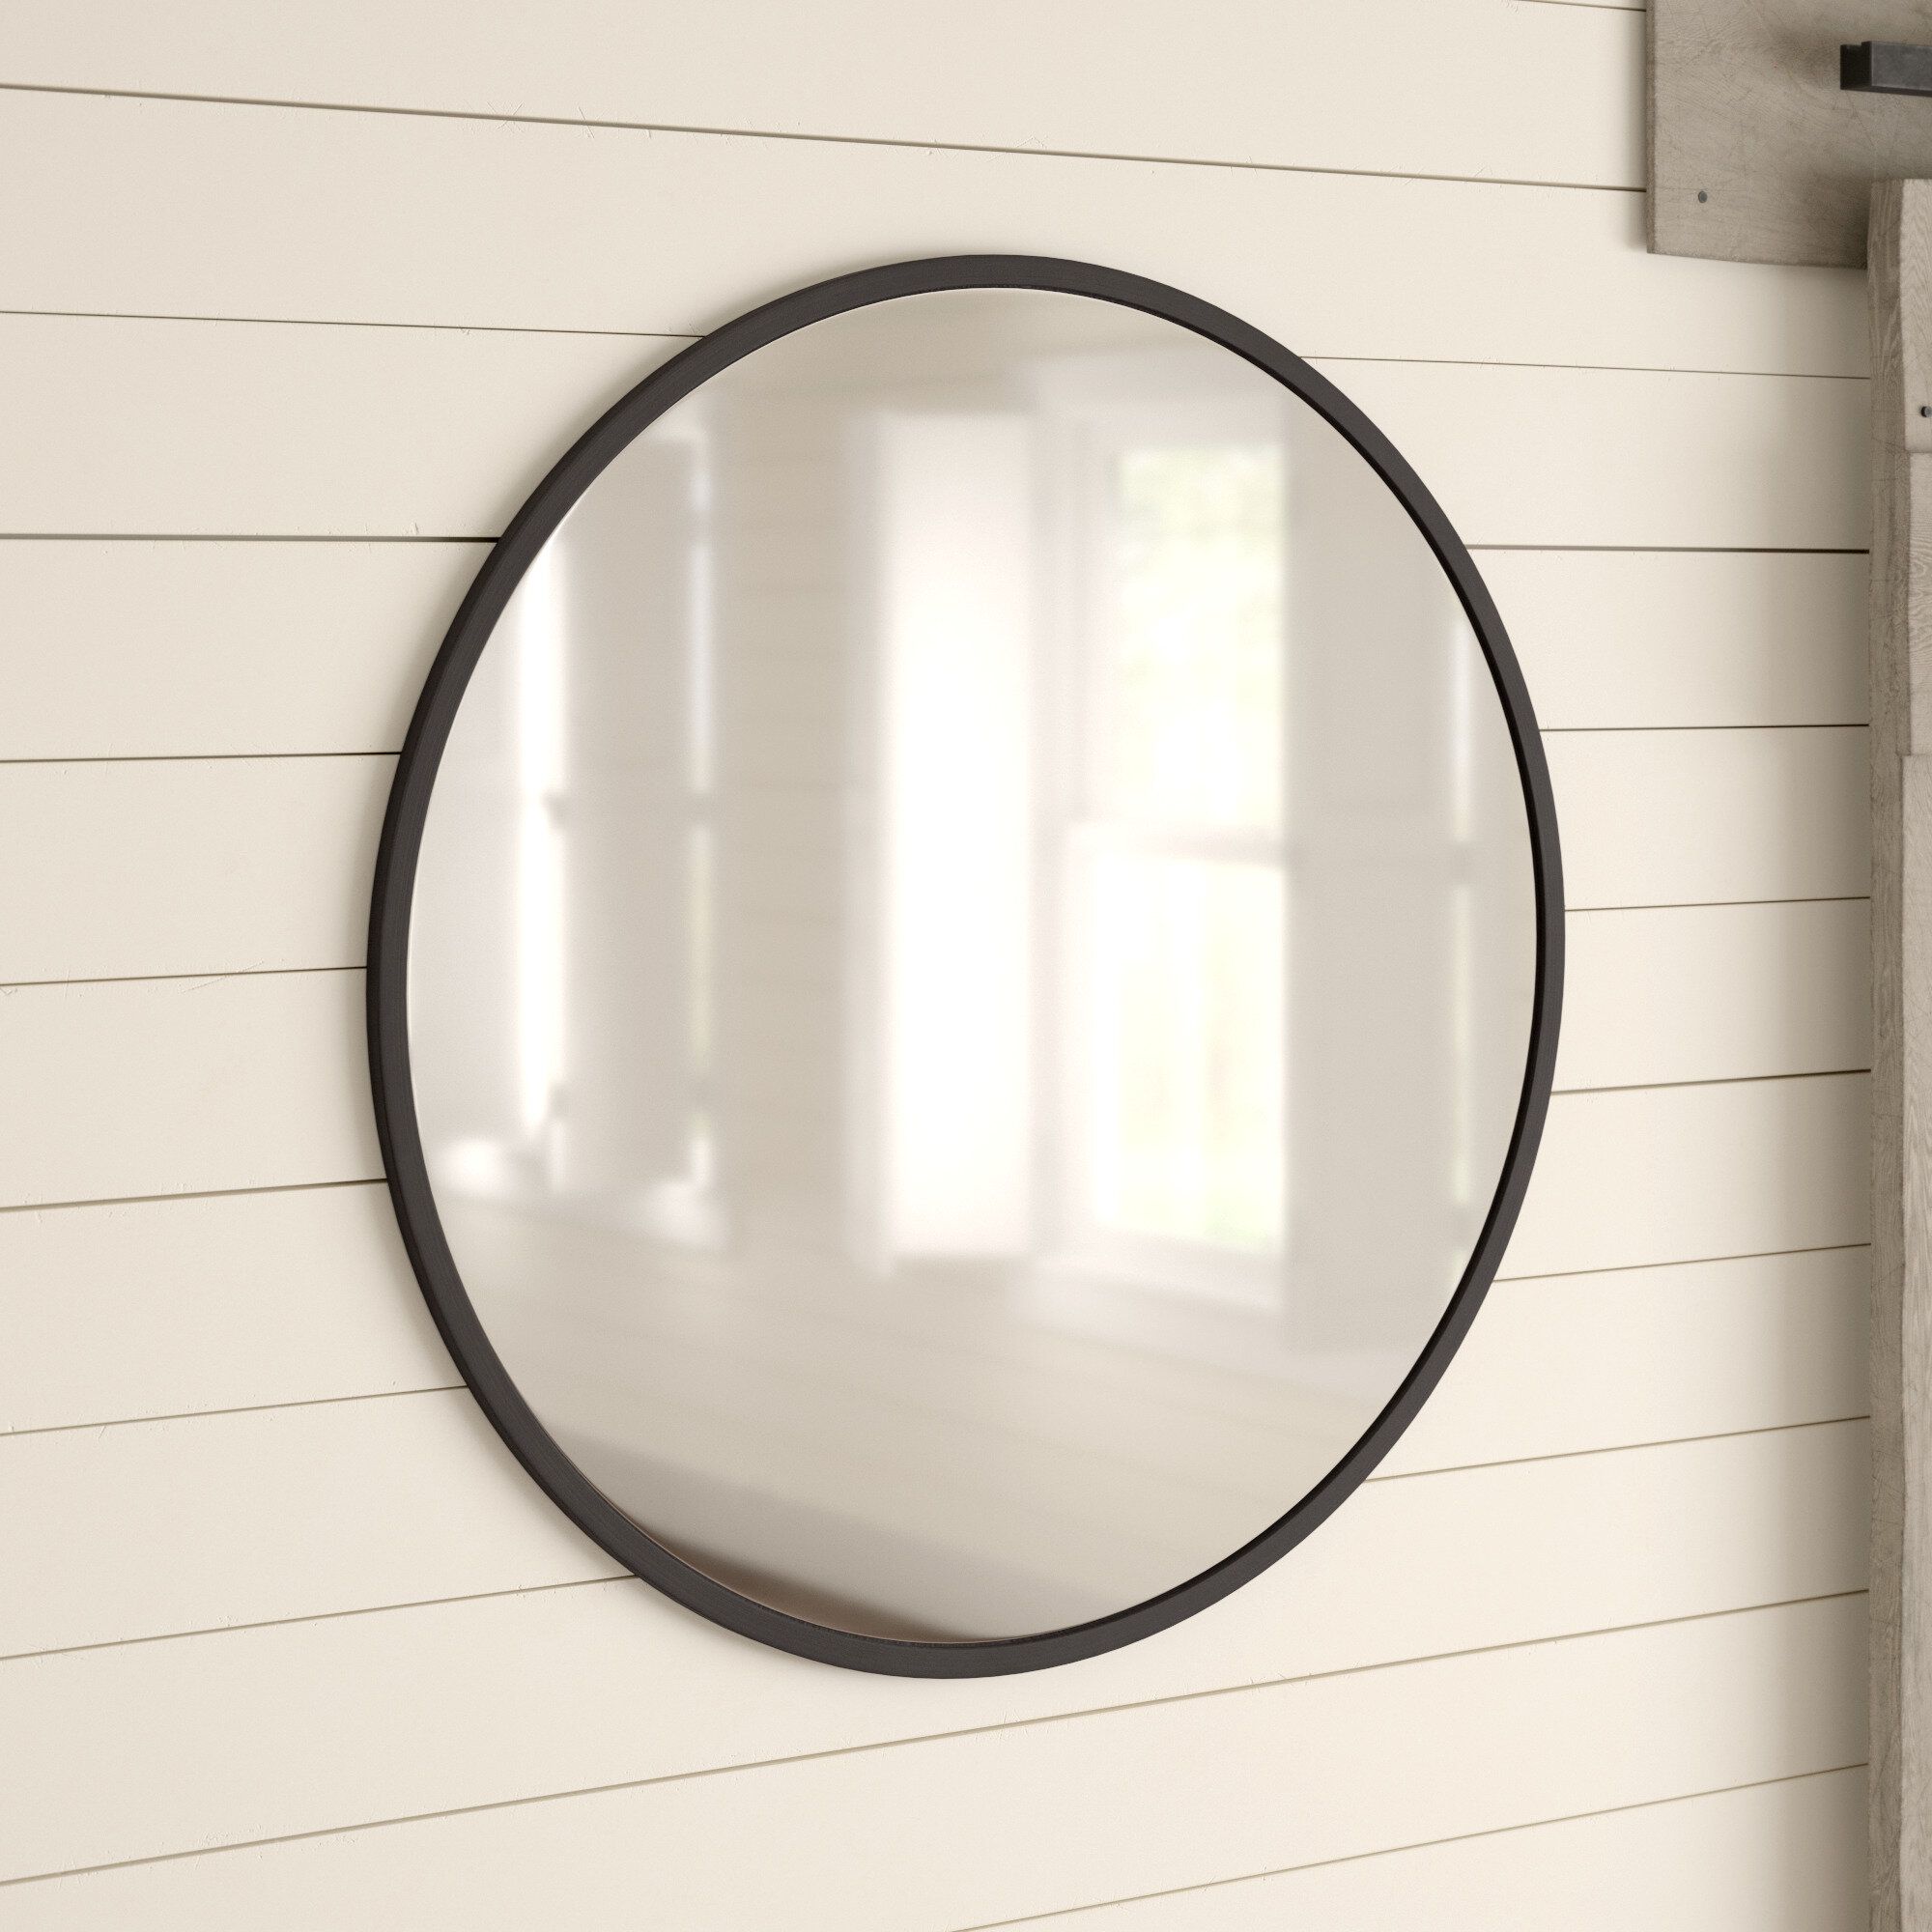 Umbra Hub Modern And Contemporary Accent Mirror Intended For Loftis Modern & Contemporary Accent Wall Mirrors (View 13 of 20)